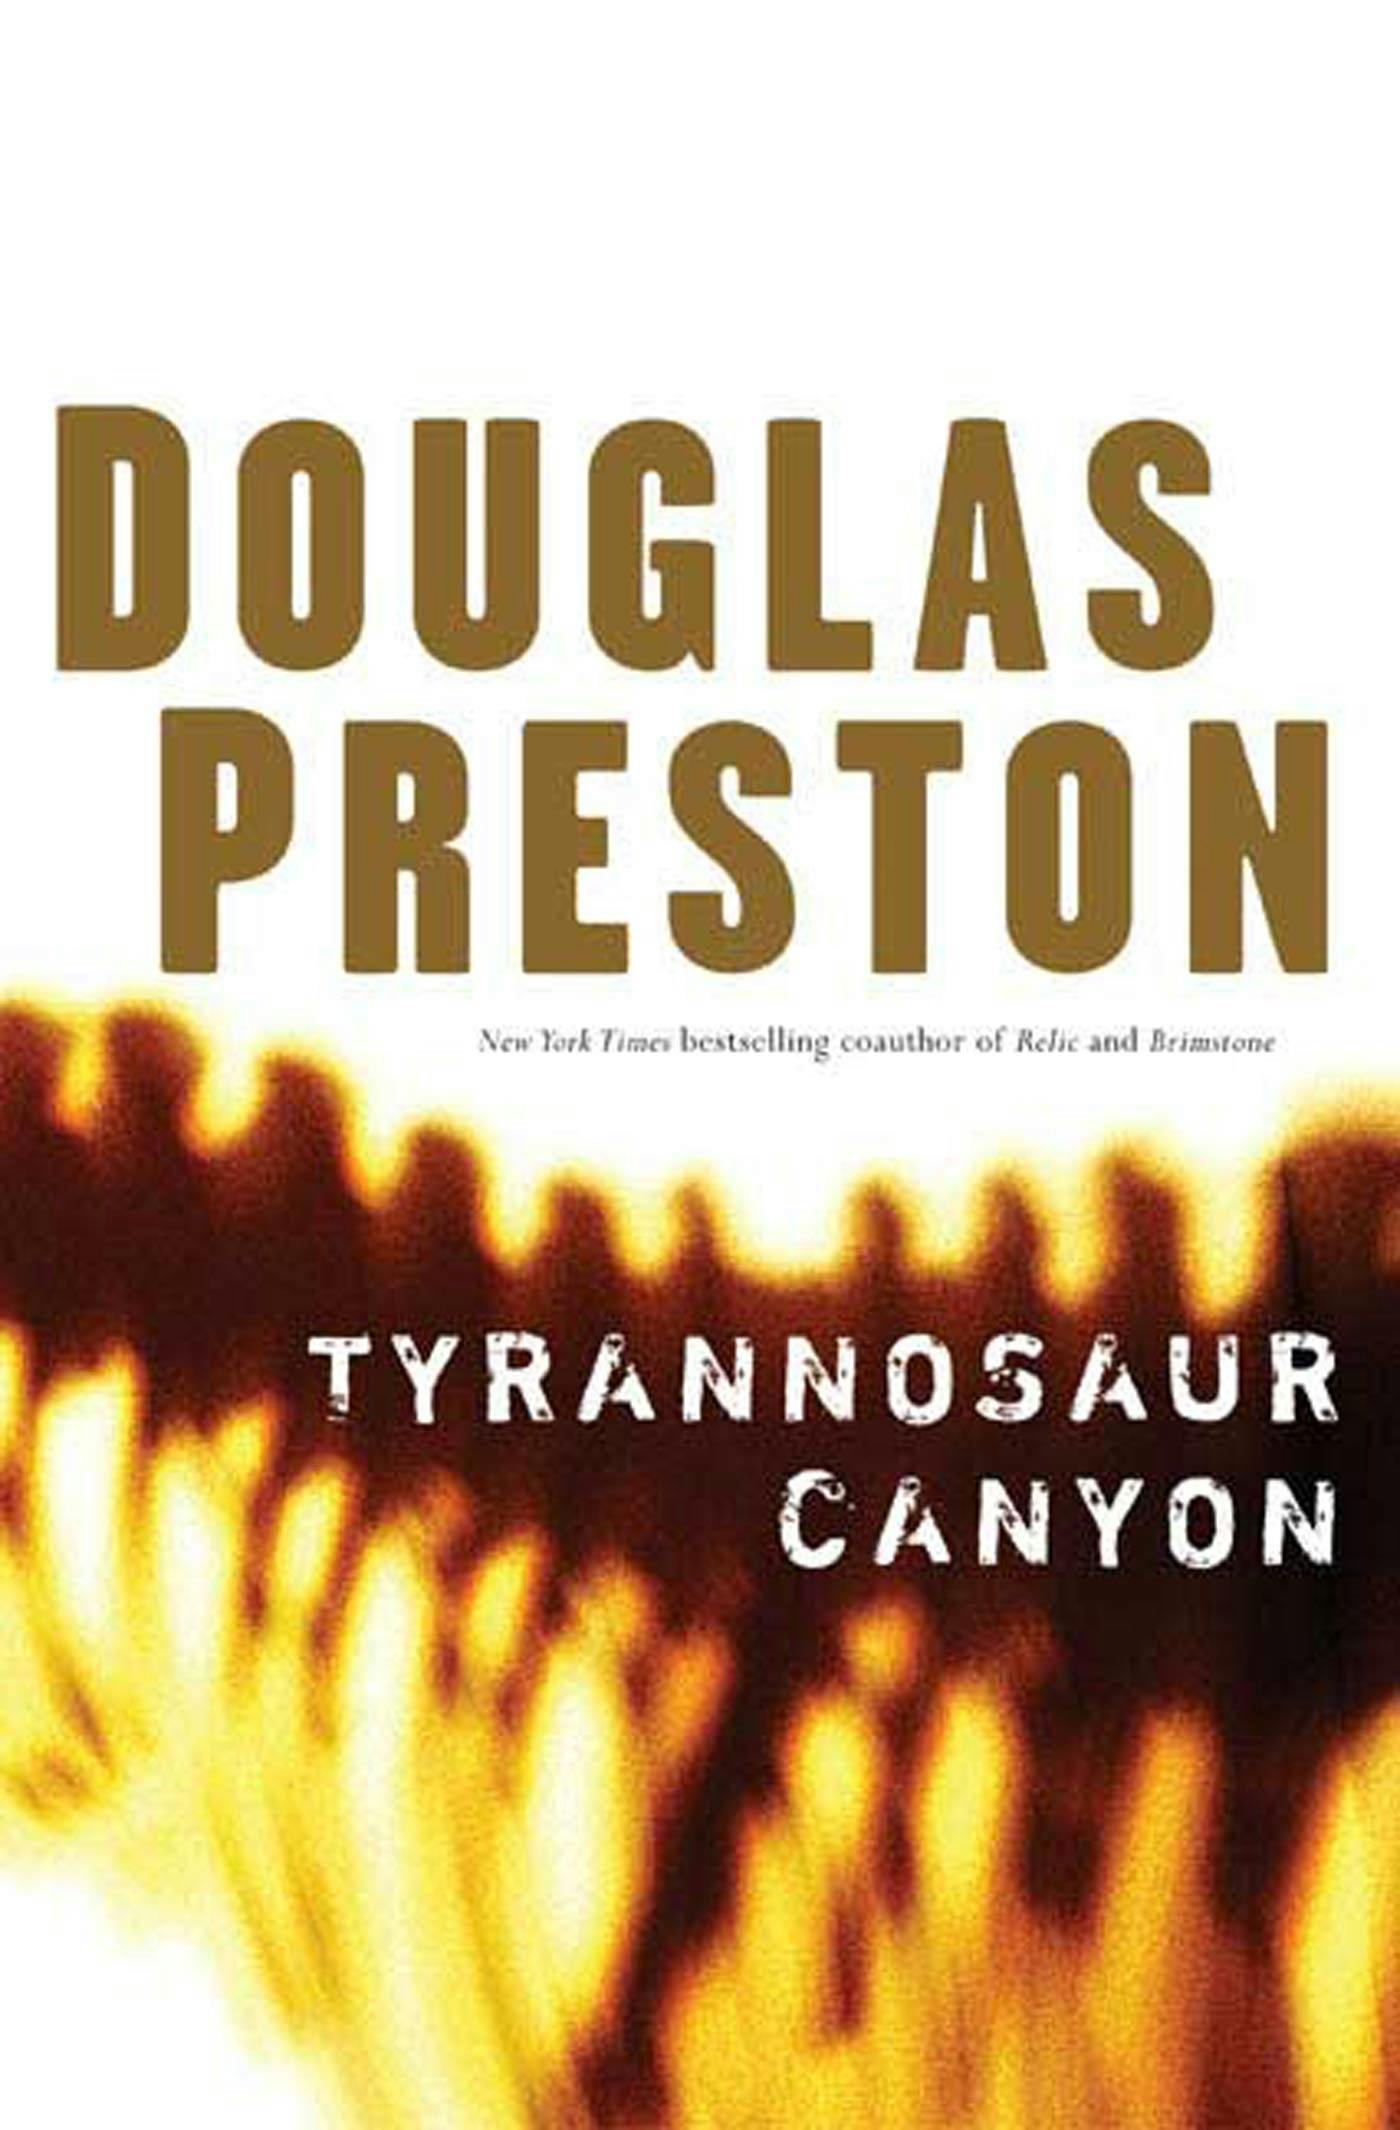 Cover for the book titled as: Tyrannosaur Canyon